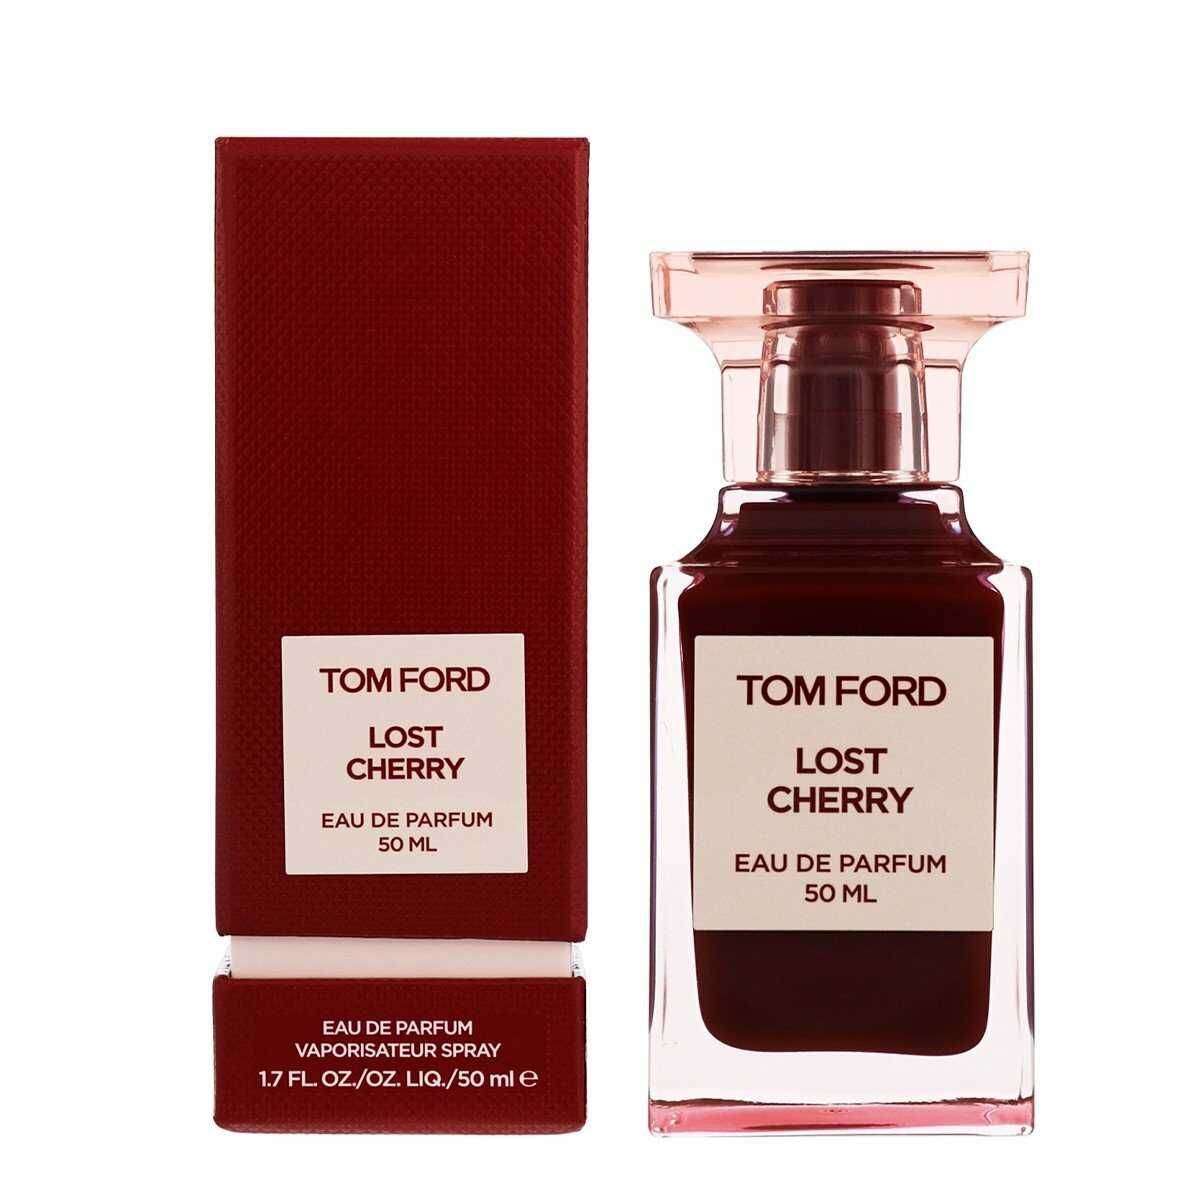  Tom Ford Lost Cherry 50ml 